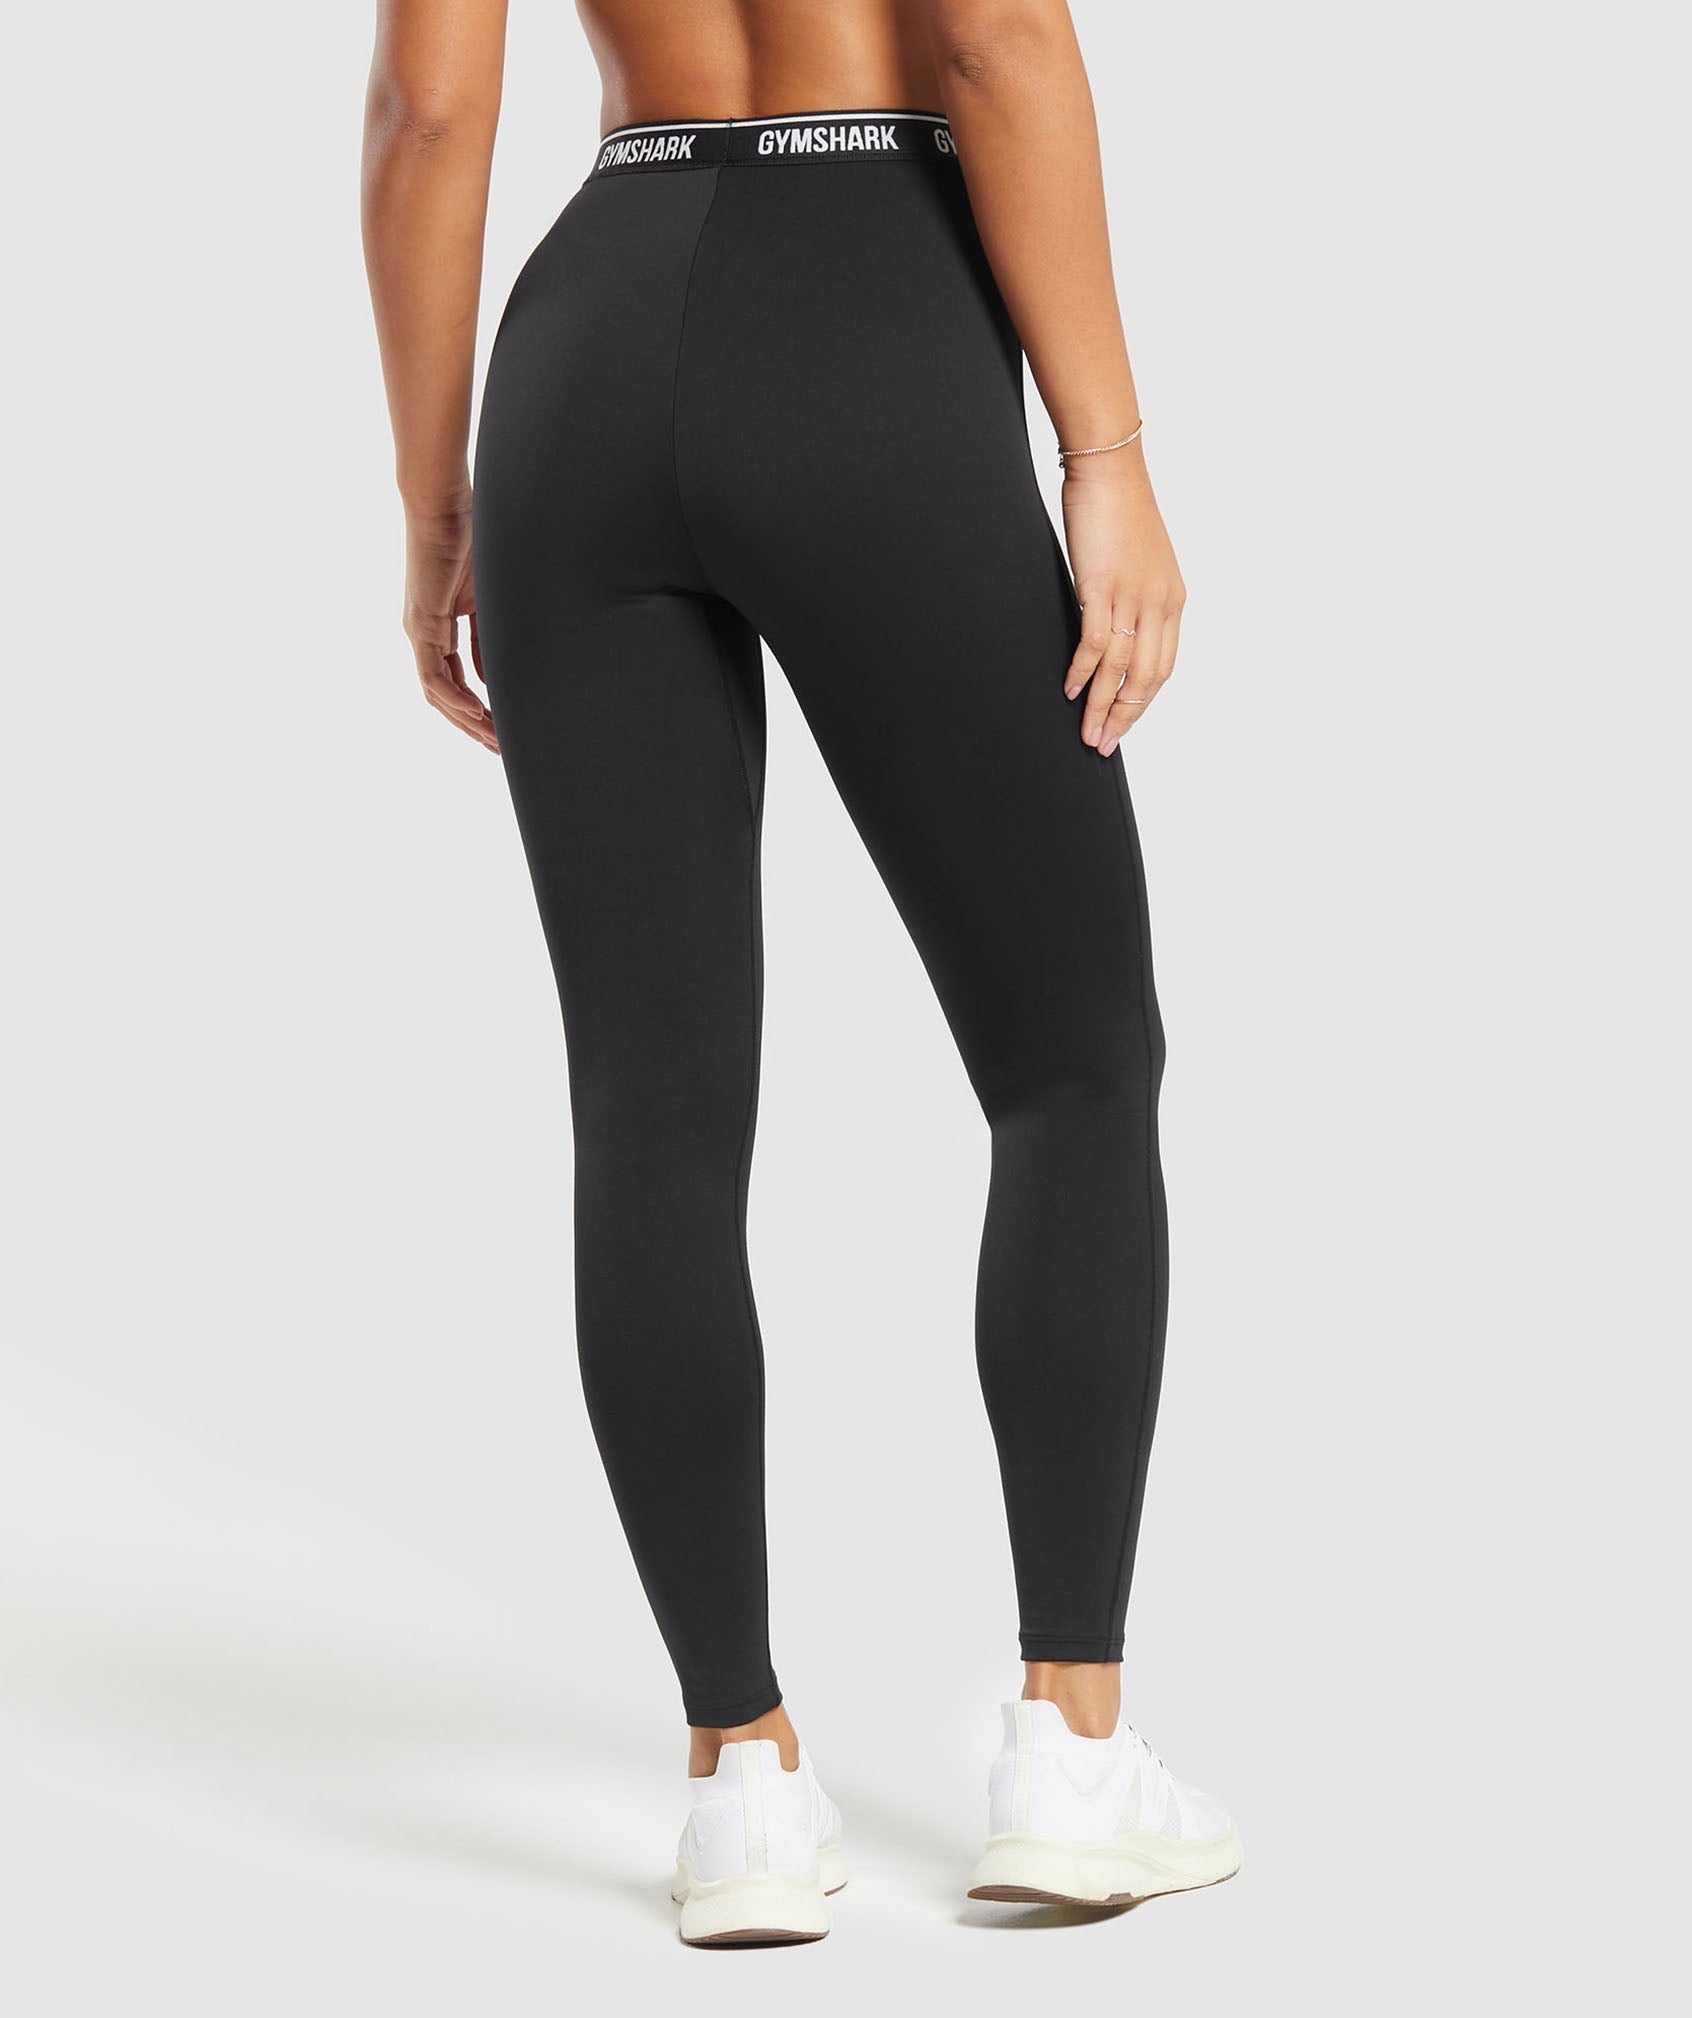 Everyday Waistband Leggings in Black - view 2